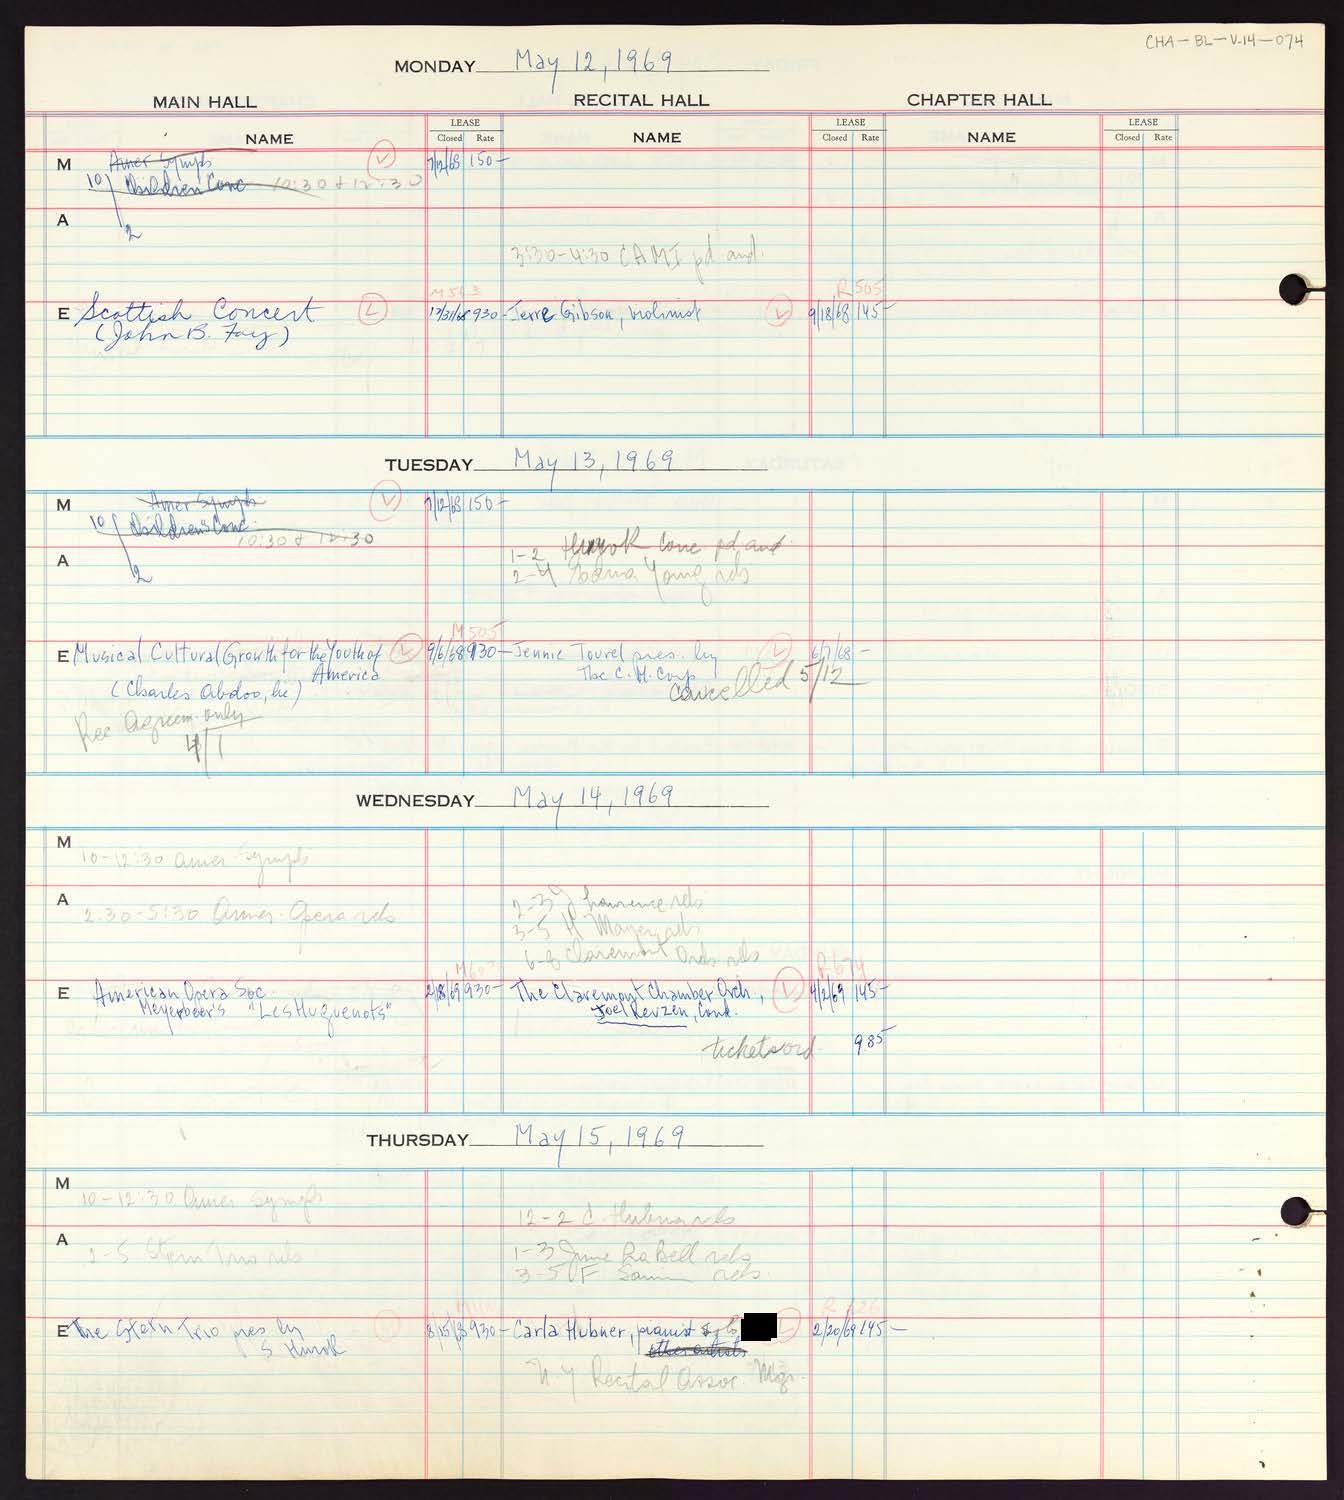 Carnegie Hall Booking Ledger, volume 14, page 74